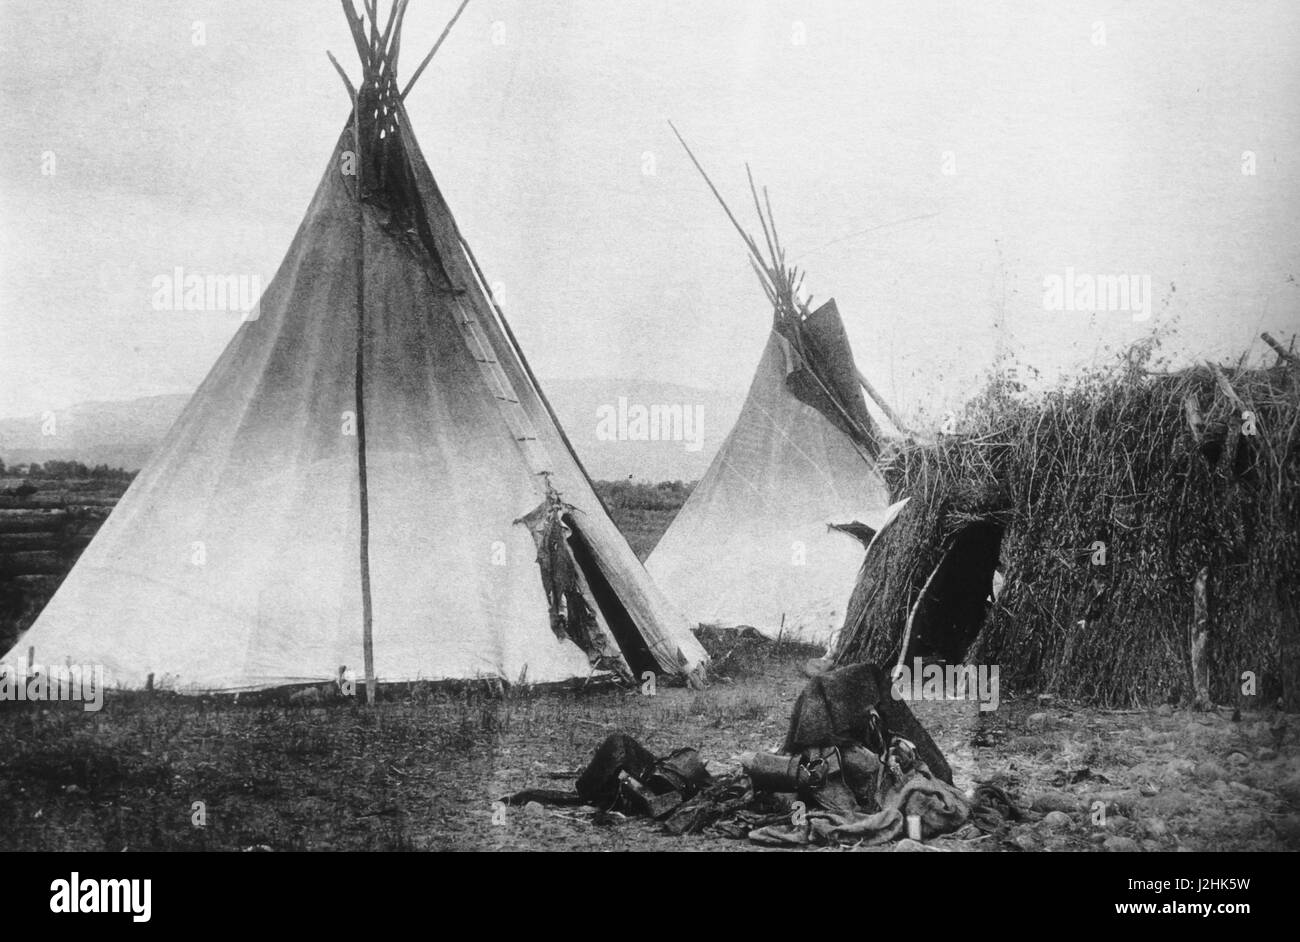 Historic photo, late 1880's, of a Utes Indian encampment of tipis and a willow wickiup shelter Stock Photo